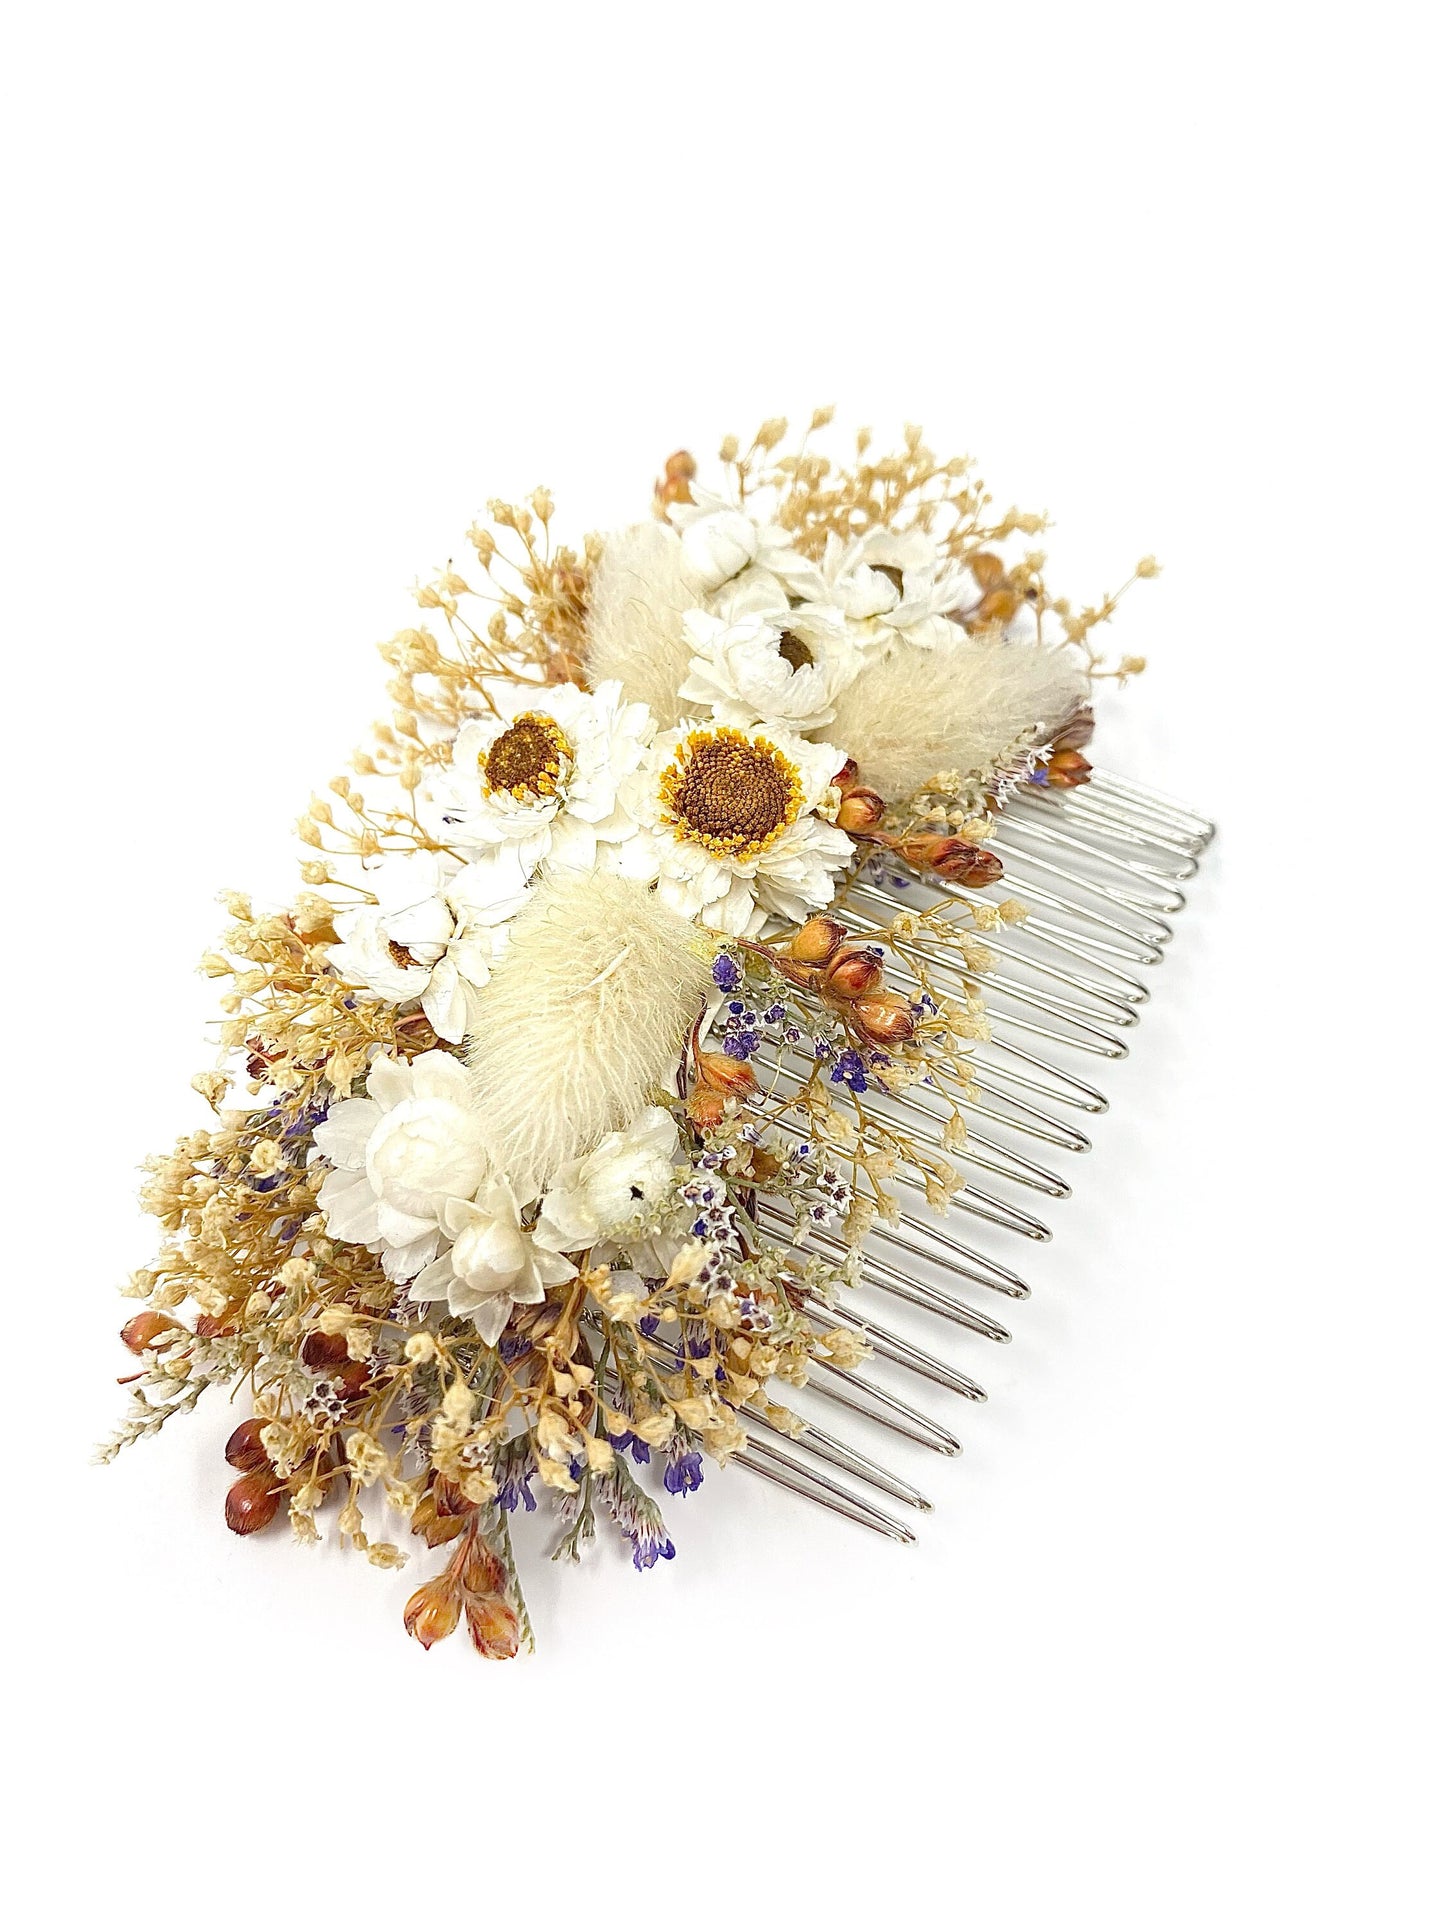 Hair Comb, Dried Flowers, Hair Pins, Bridal, Hair Accessories, Wedding Accessories, Ammobium, Bunny Tails, Preserved Floral, Caspia